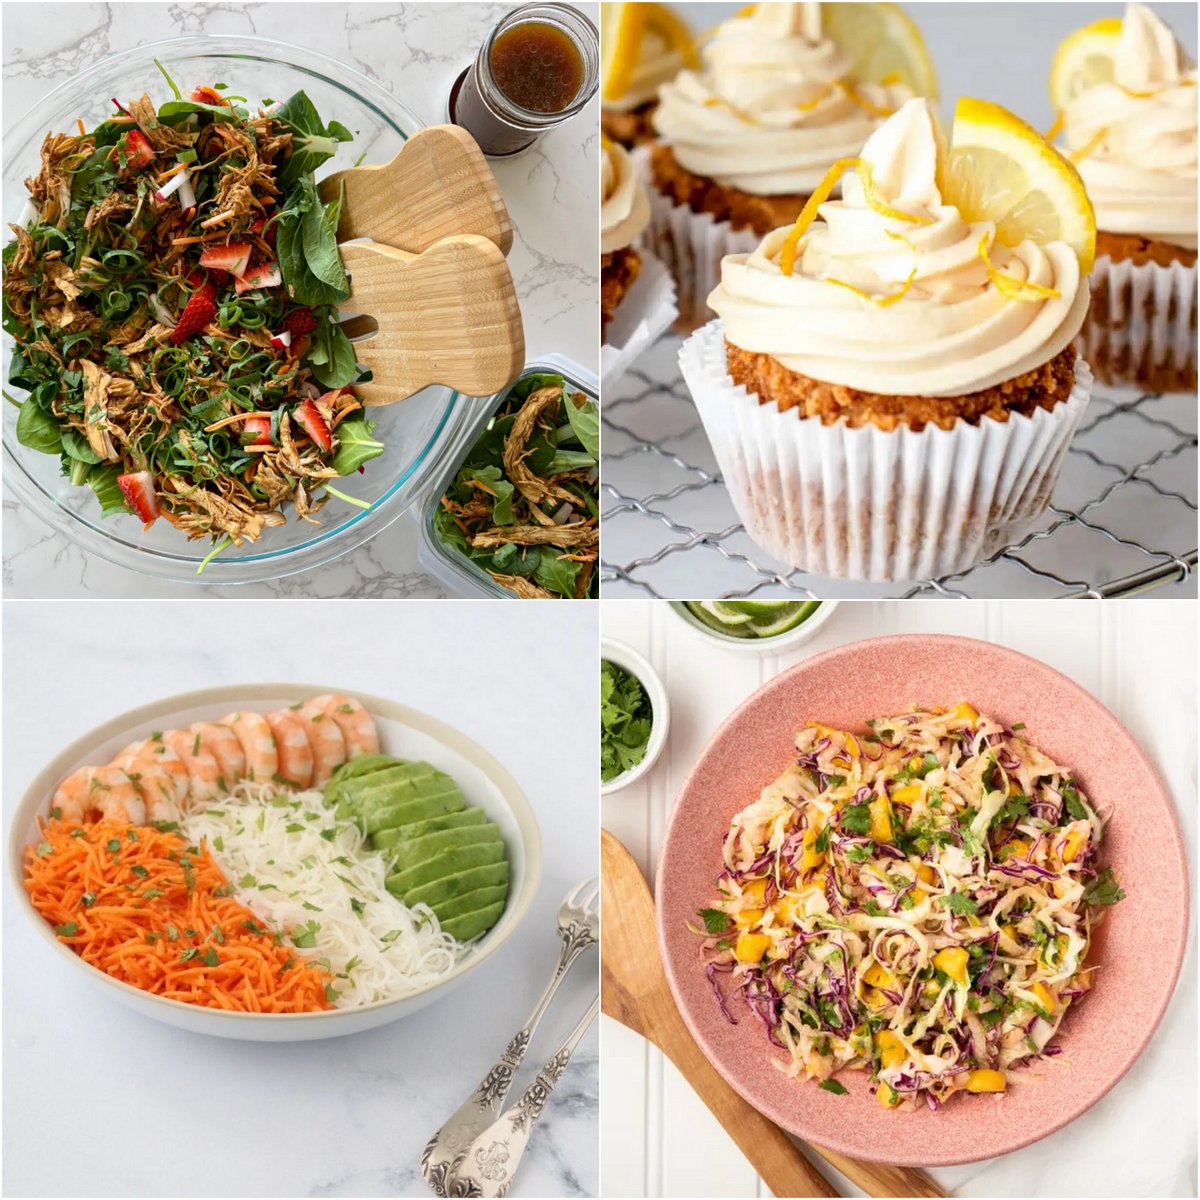 Paleo AIP Recipe Roundtable #406 | Phoenix Helix - *Featured Recipes: Strawberry Shredded Chicken Salad, Lemon Olive Oil Cupcakes, Spring Roll Salad Bowl, and Jicama Mango Slaw.